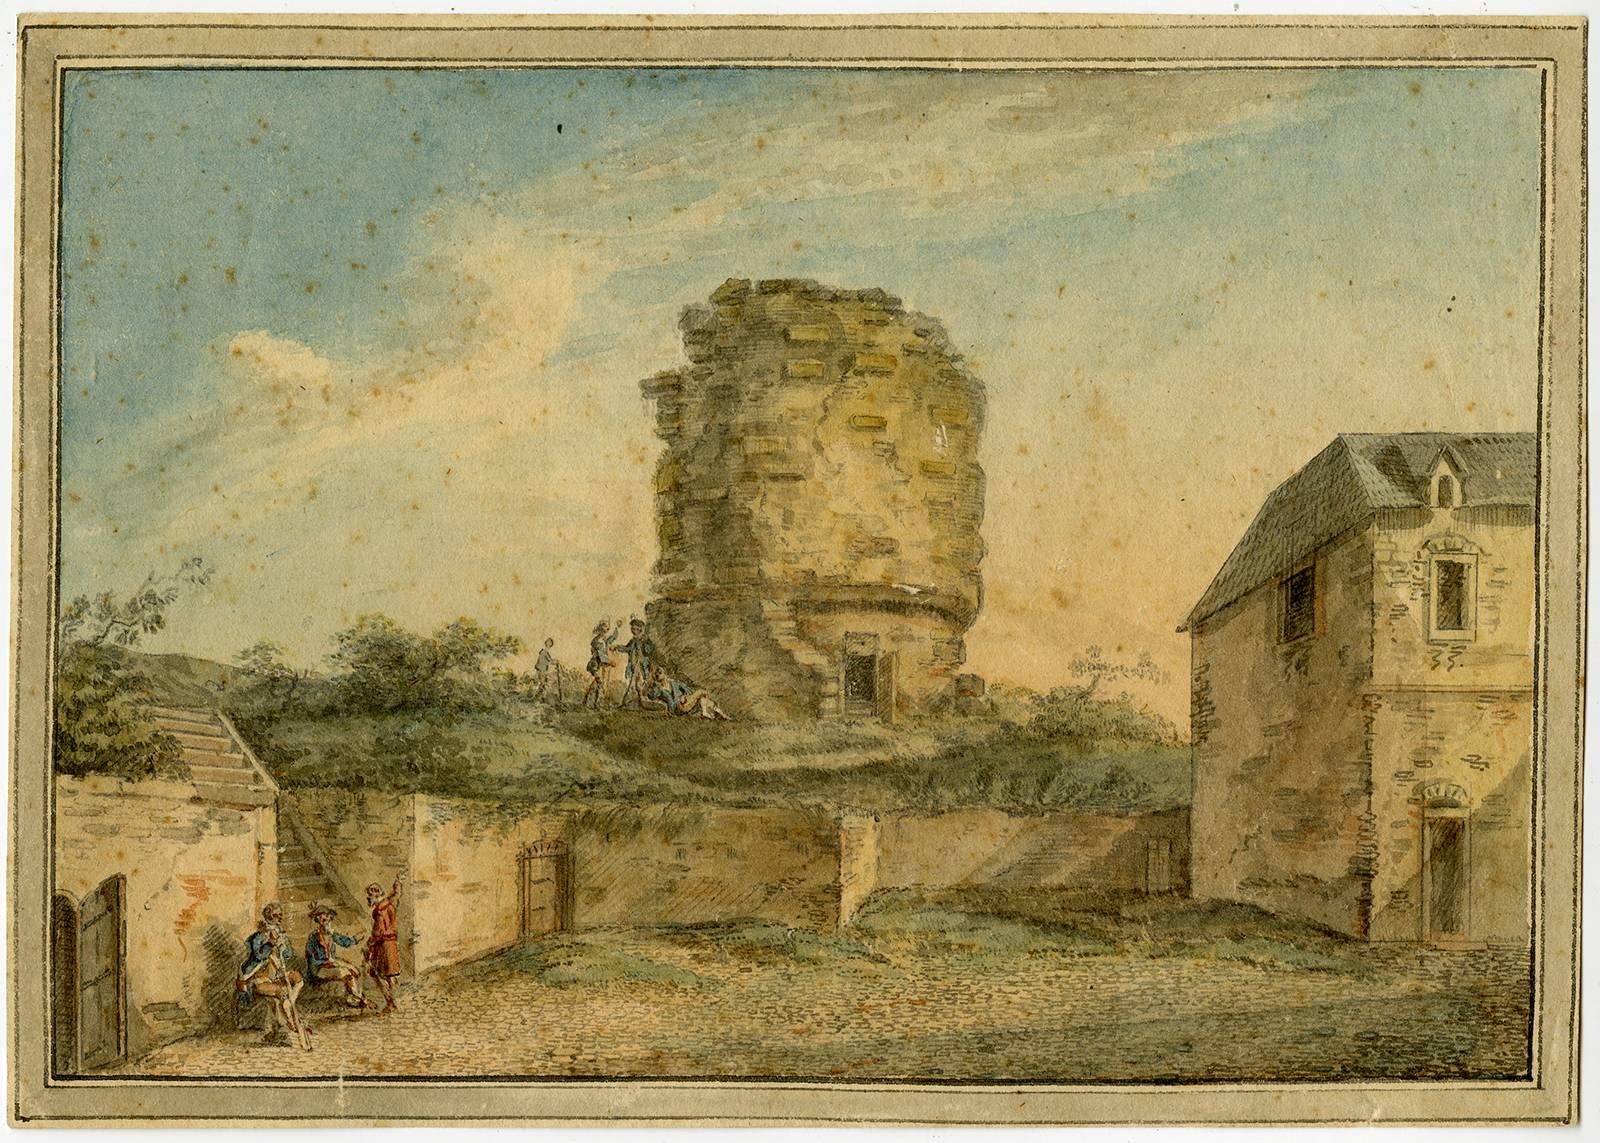 Unknown Landscape Art - Untitled - View of an old citywall with ruined tower. Two groups of figures.